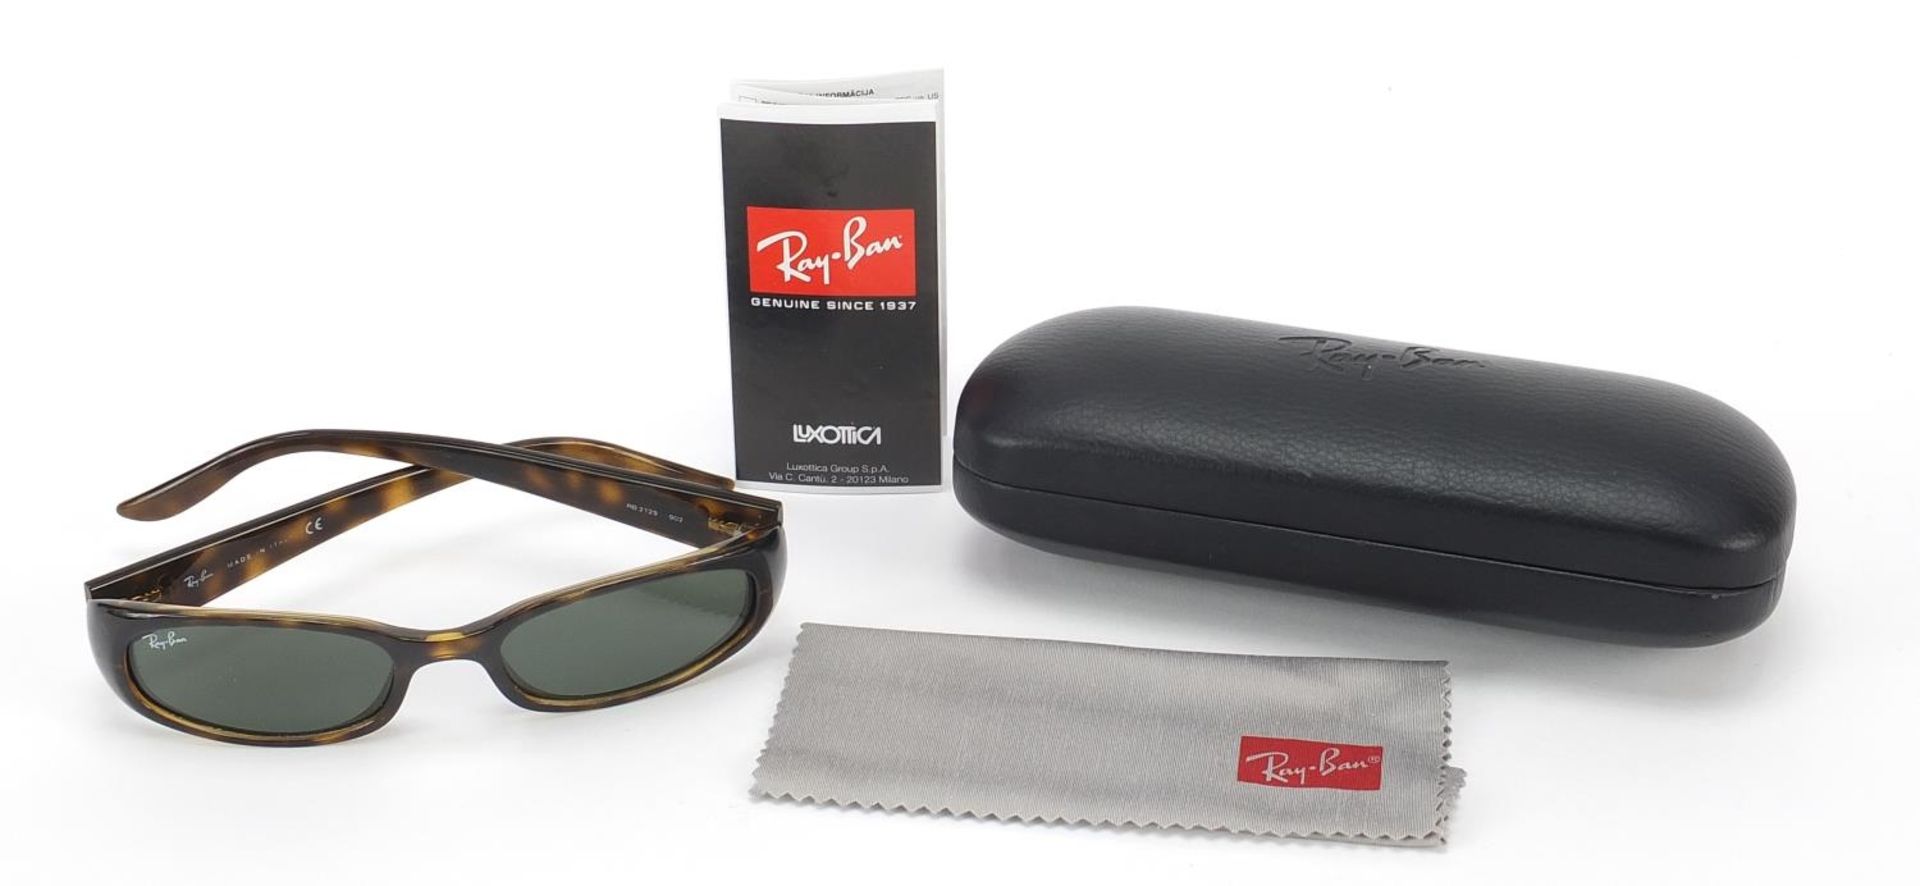 Cased pair of Ray-Ban tortoiseshell design sunglasses with cleaning cloth